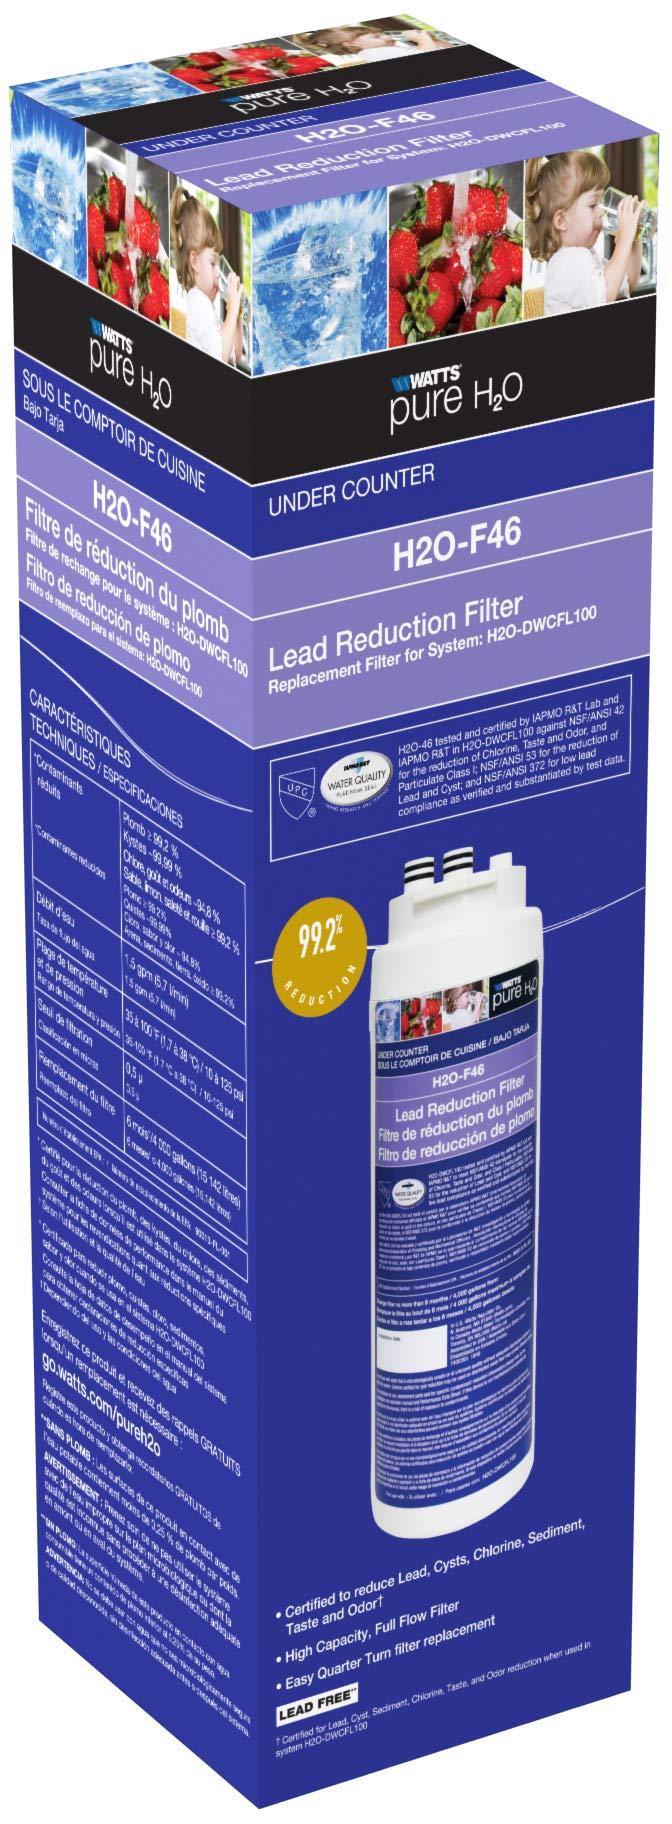 Watts Premier H2O-F46 Pure H2O Lead Reduction Water Filter Replacement, White, 1 pack